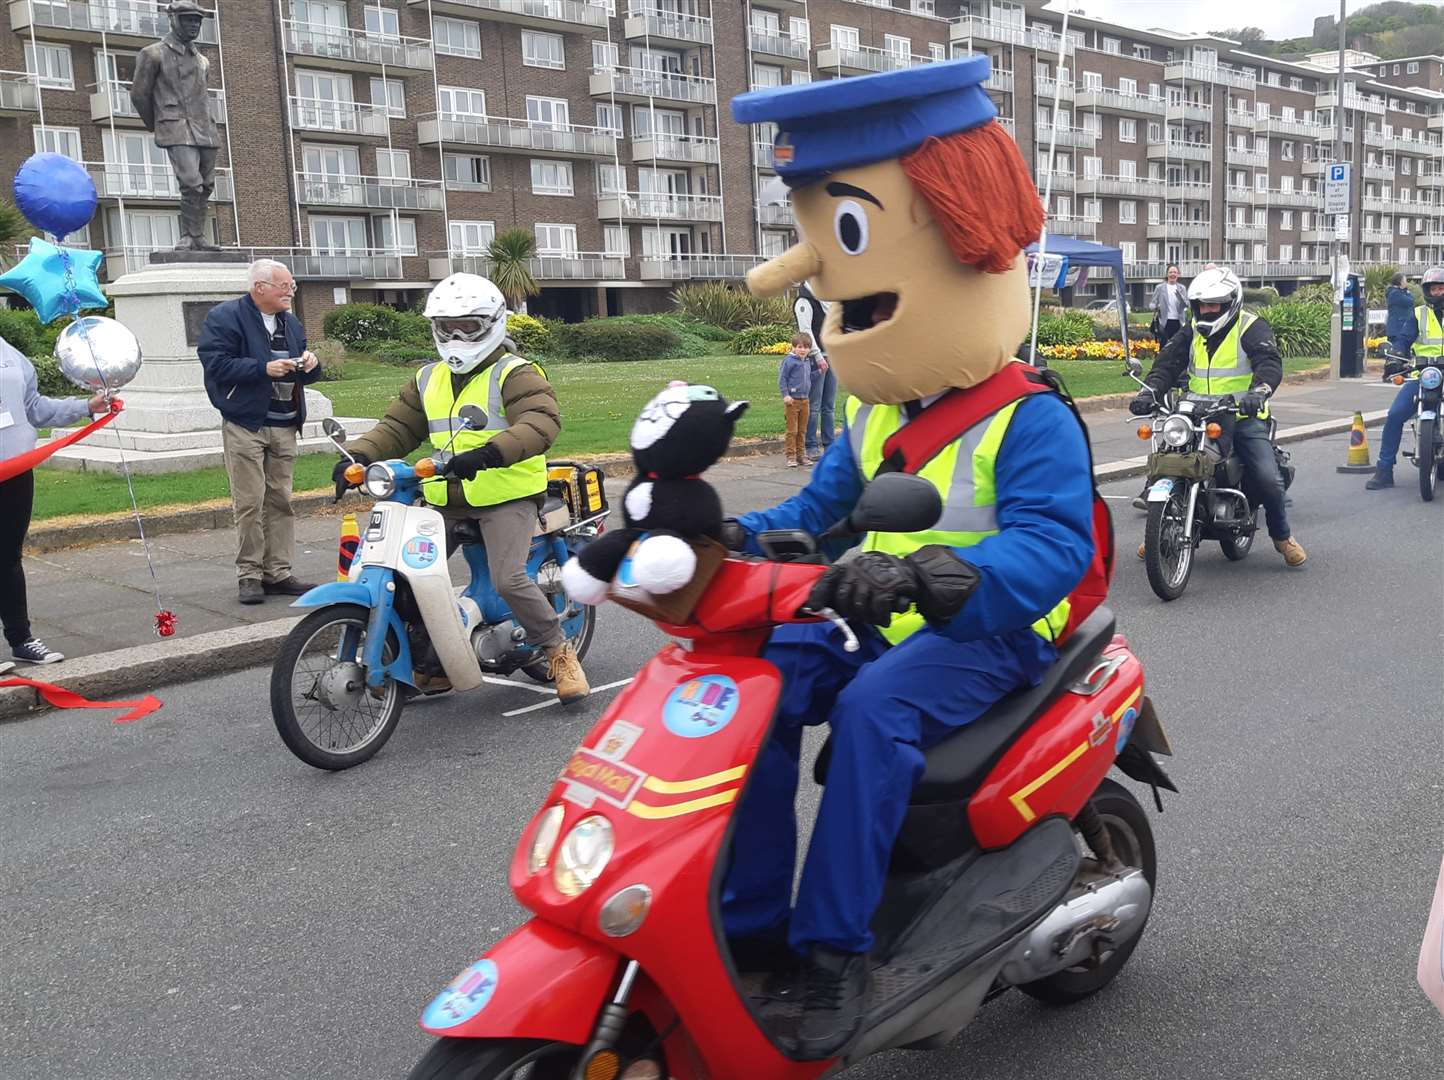 The riders set off with John Rogers as Postman Pat